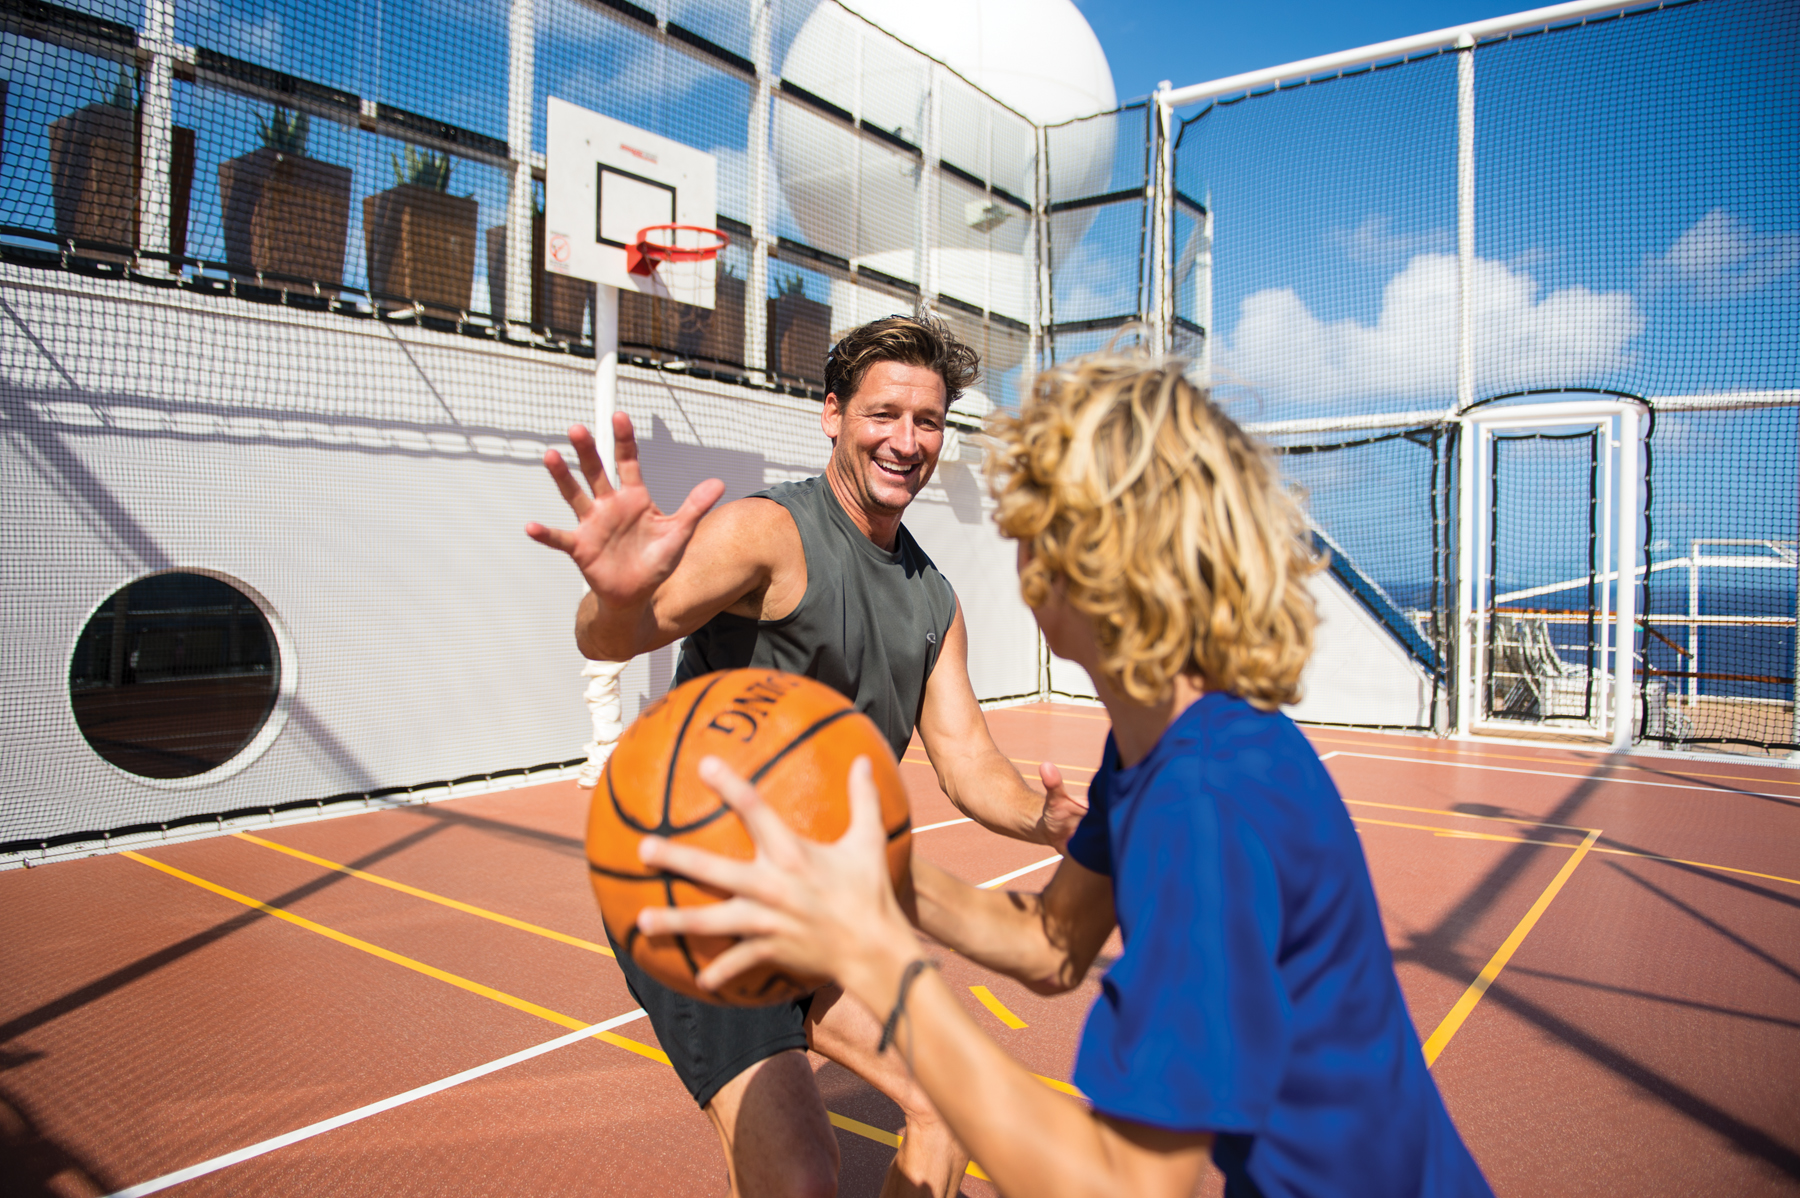 A couple playing basketball on a Celebrity cruise ship (source: Celebrity Cruises)